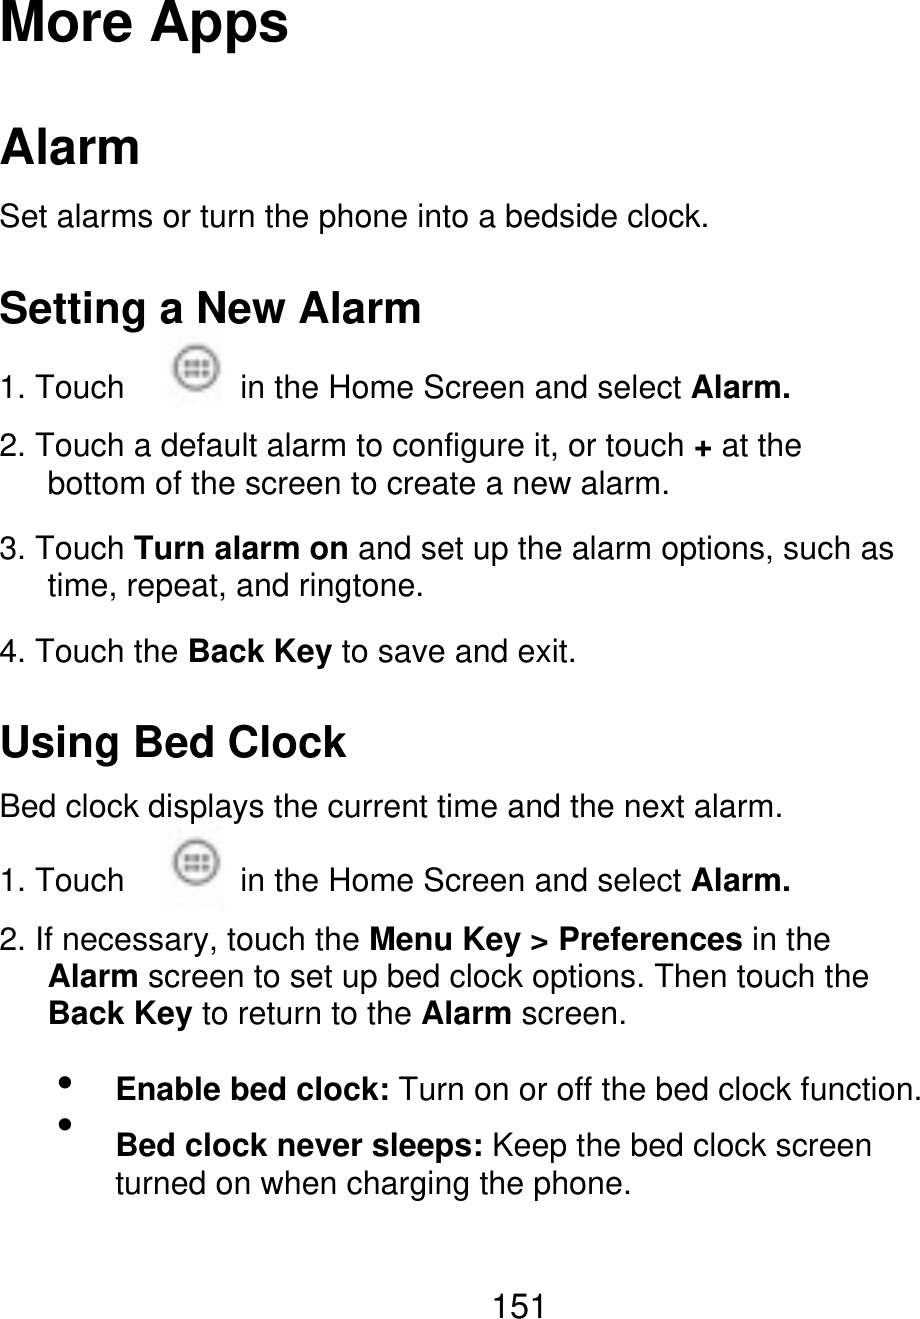 More Apps Alarm Set alarms or turn the phone into a bedside clock. Setting a New Alarm 1. Touch in the Home Screen and select Alarm. 2. Touch a default alarm to configure it, or touch + at the       bottom of the screen to create a new alarm. 3. Touch Turn alarm on and set up the alarm options, such as    time, repeat, and ringtone. 4. Touch the Back Key to save and exit. Using Bed Clock Bed clock displays the current time and the next alarm. 1. Touch in the Home Screen and select Alarm. 2. If necessary, touch the Menu Key &gt; Preferences in the    Alarm screen to set up bed clock options. Then touch the    Back Key to return to the Alarm screen.   Enable bed clock: Turn on or off the bed clock function. Bed clock never sleeps: Keep the bed clock screen turned on when charging the phone. 151 